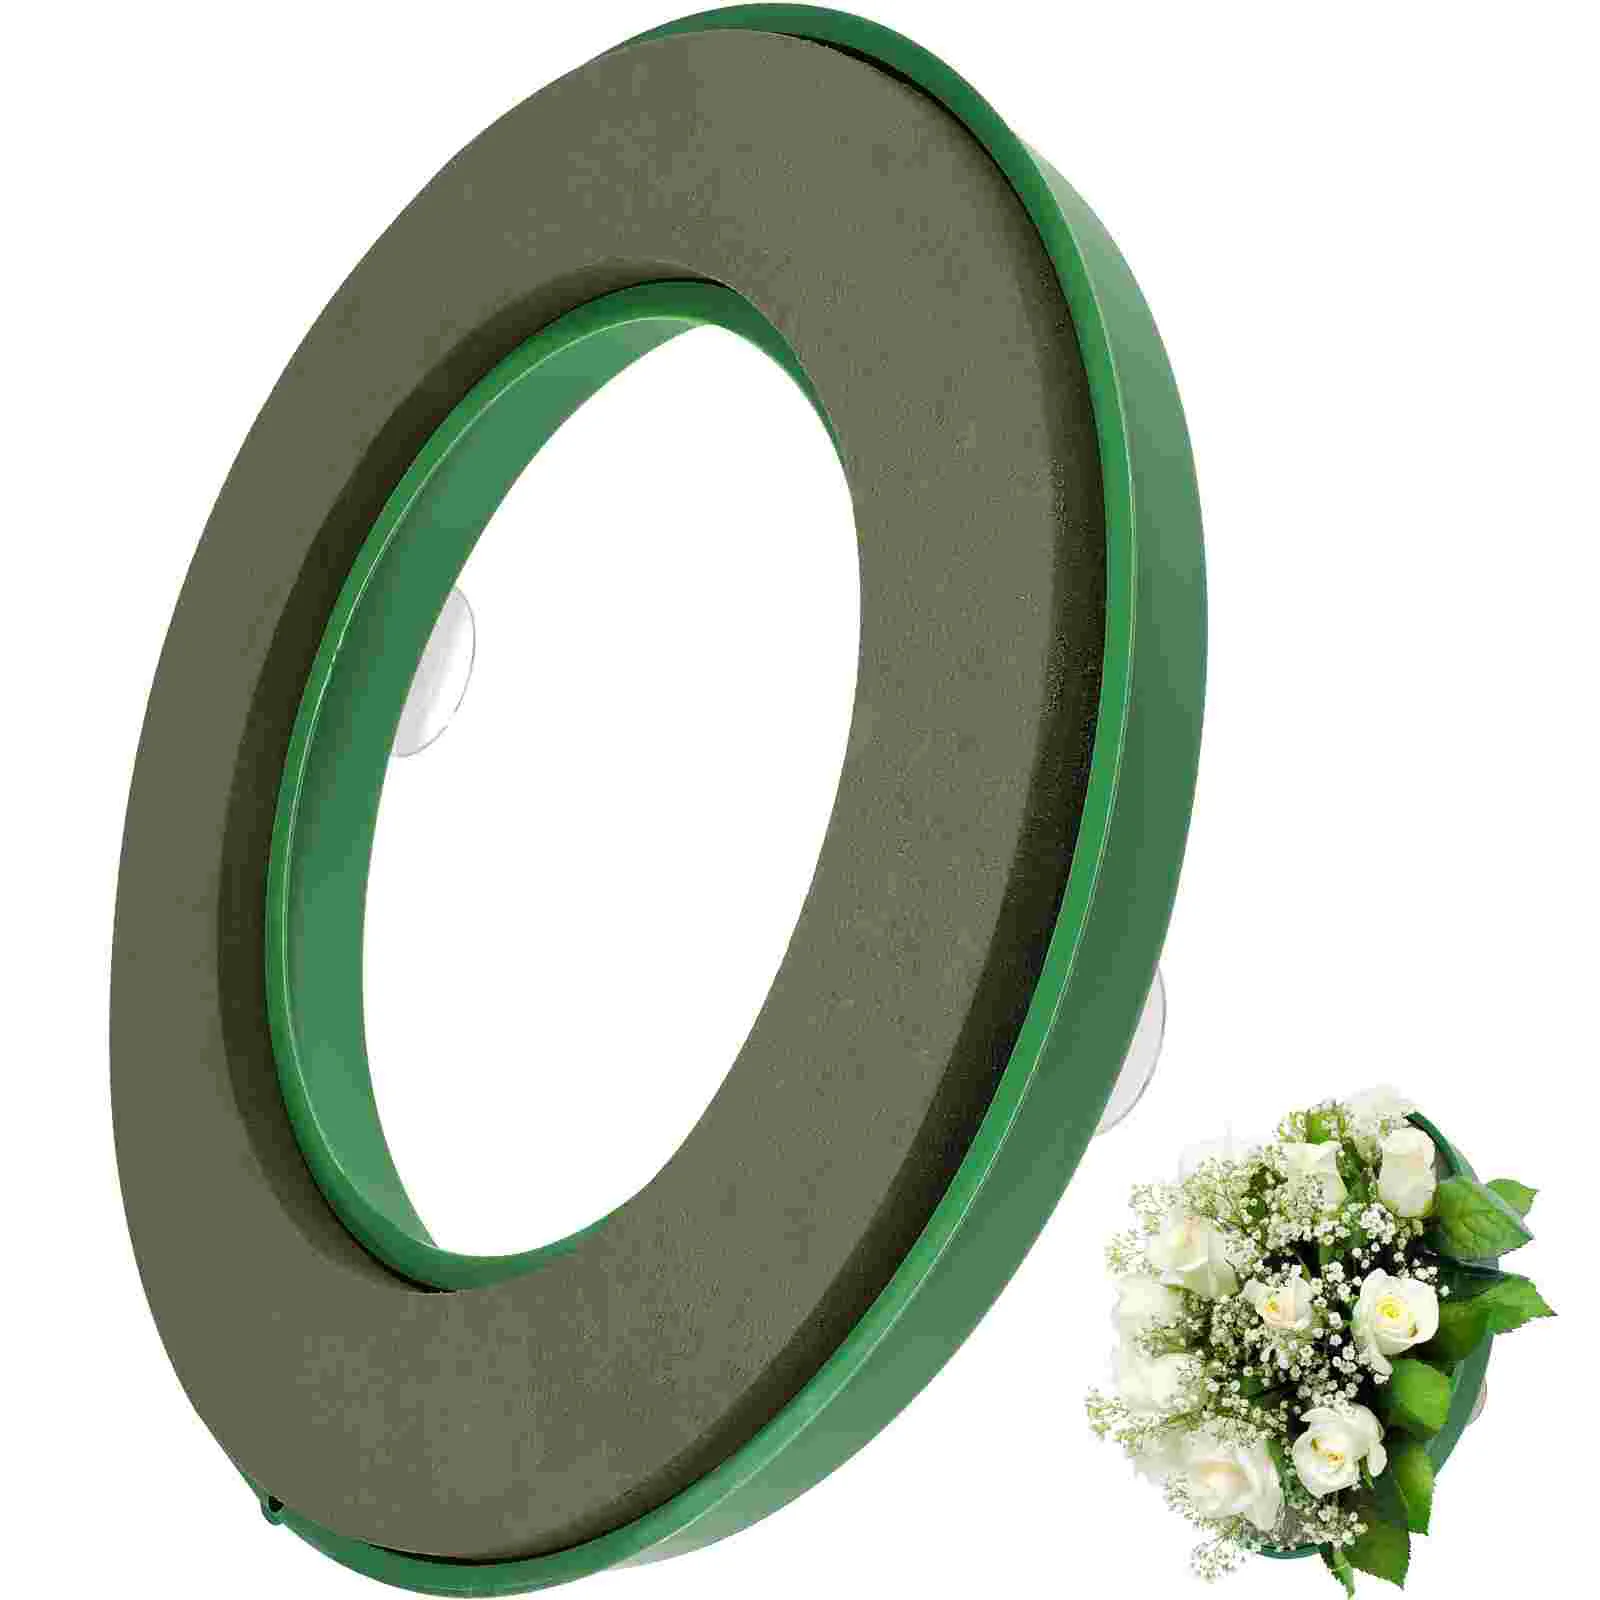 

Foam Wreath Mud Block Rings Garland Form Circles Flower Plastic Floral Projects Base Holder